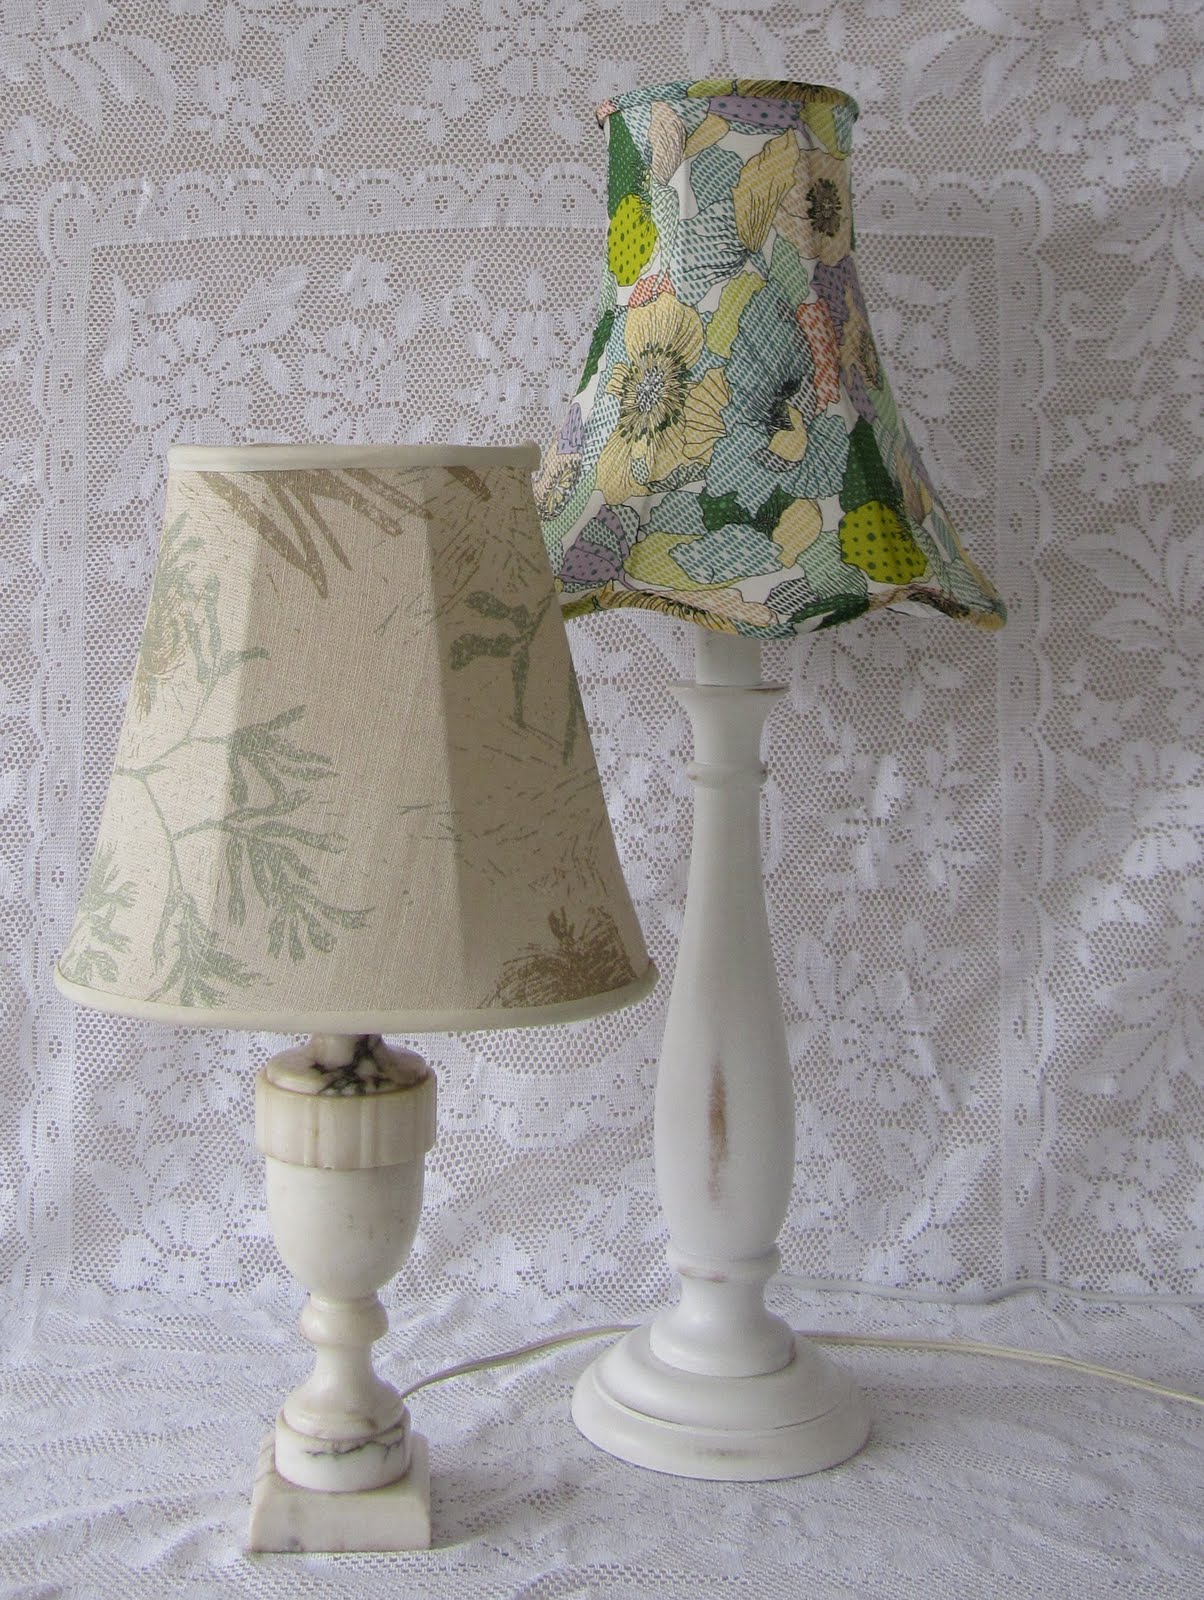 Recover A Lampshade Tutorial, How To Cover A Lampshade Frame With Material